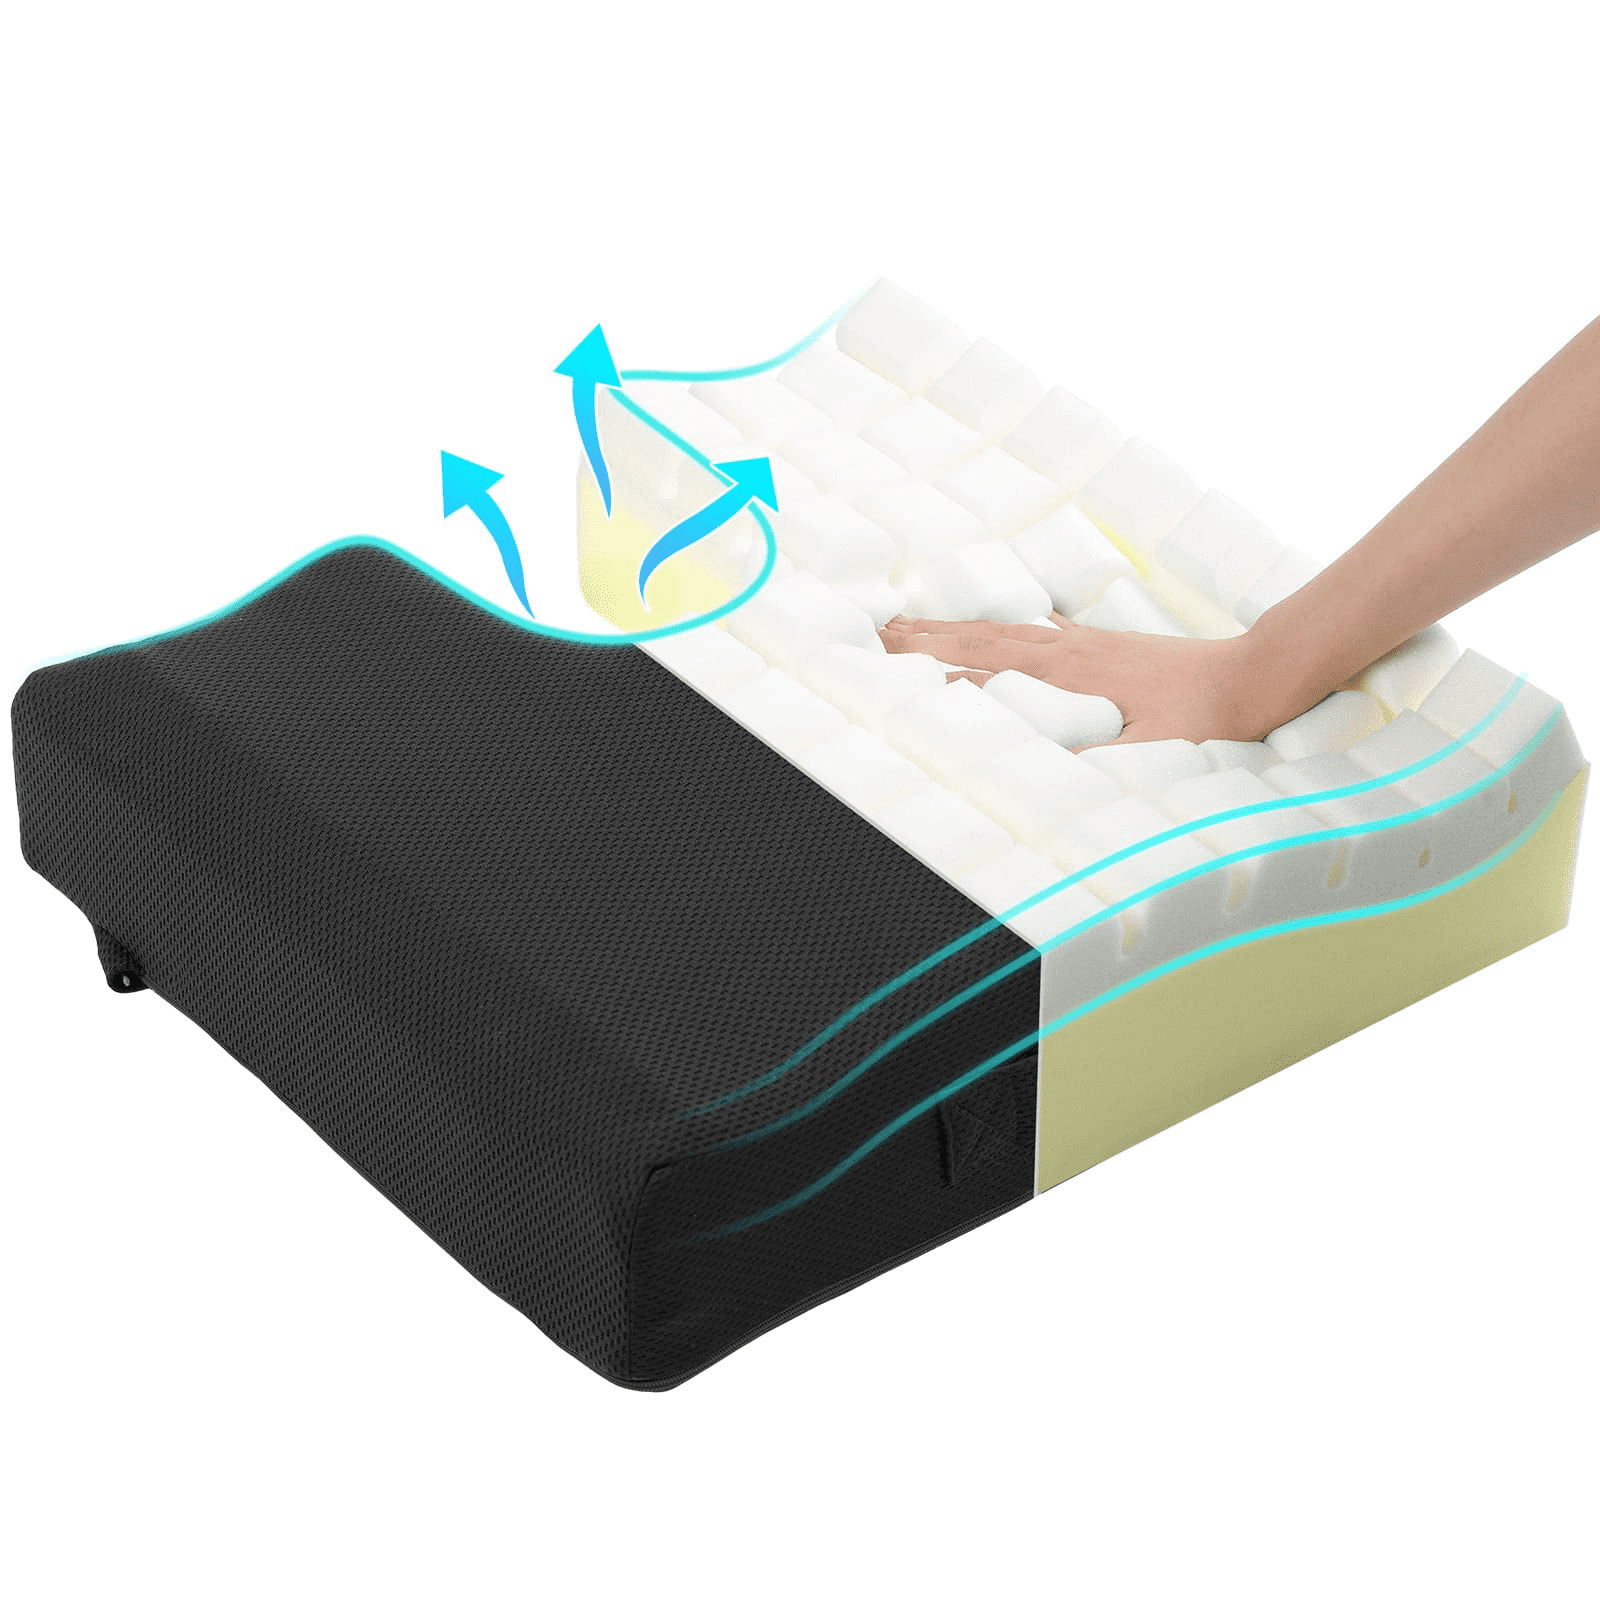 Extra Large Firm Seat Cushion Pad for Bariatric Overweight Users - Firm Memory Foam Chair Support Pillow for Wheelchair, Office & Car 19 inchx18